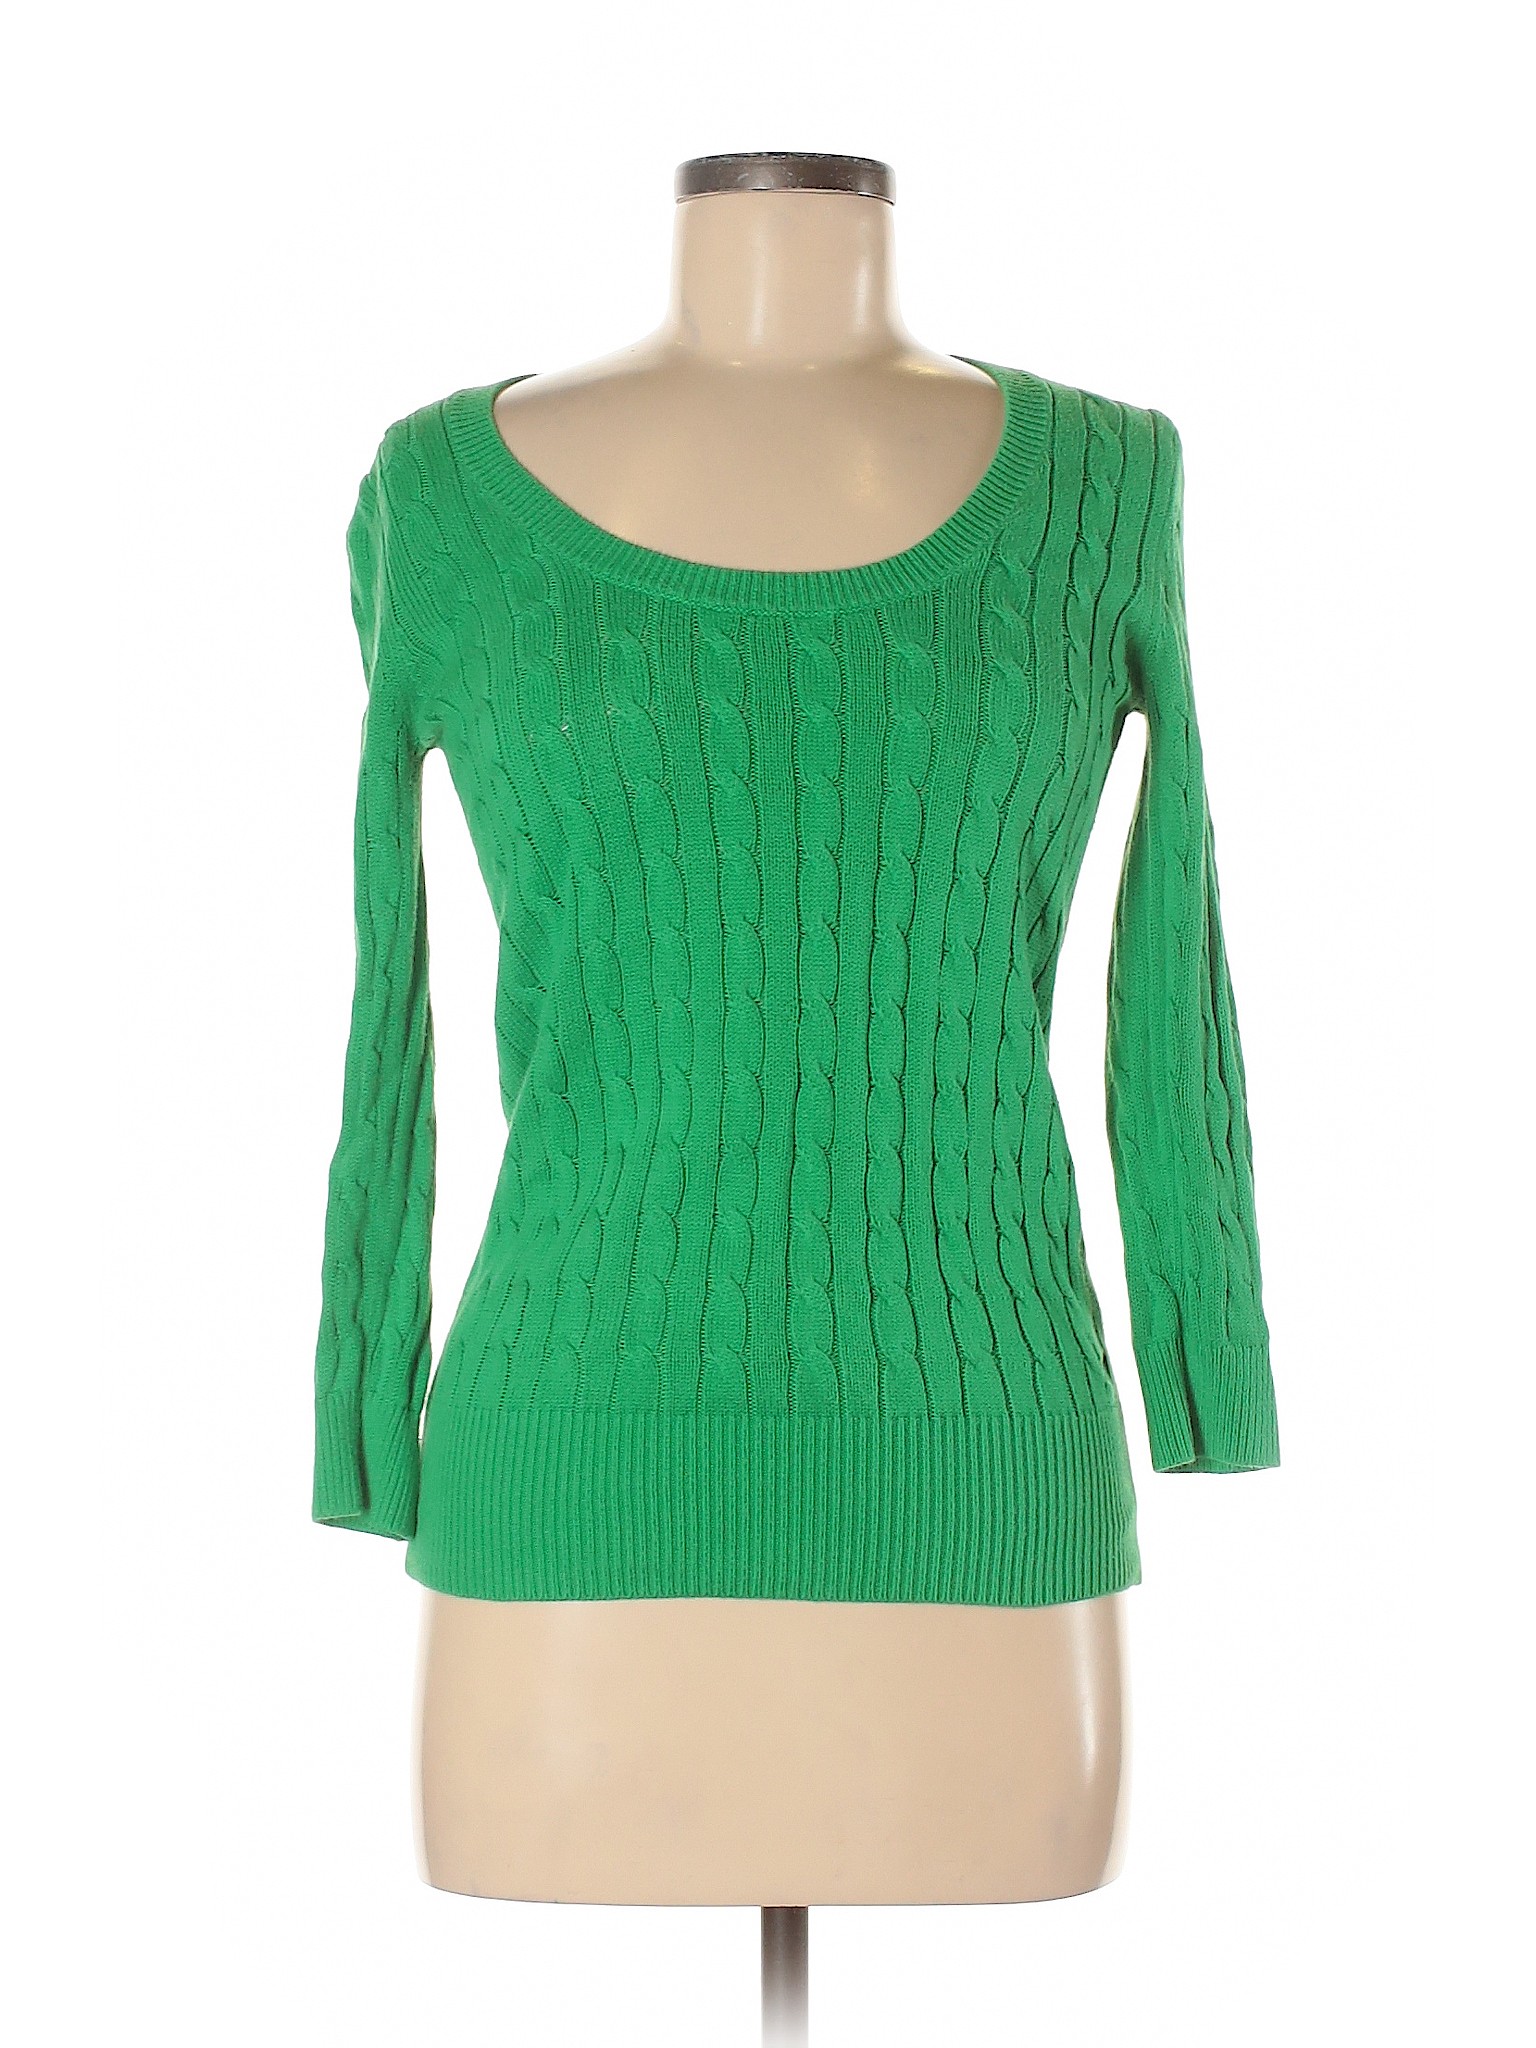 American Eagle Outfitters Women Green Pullover Sweater M | eBay